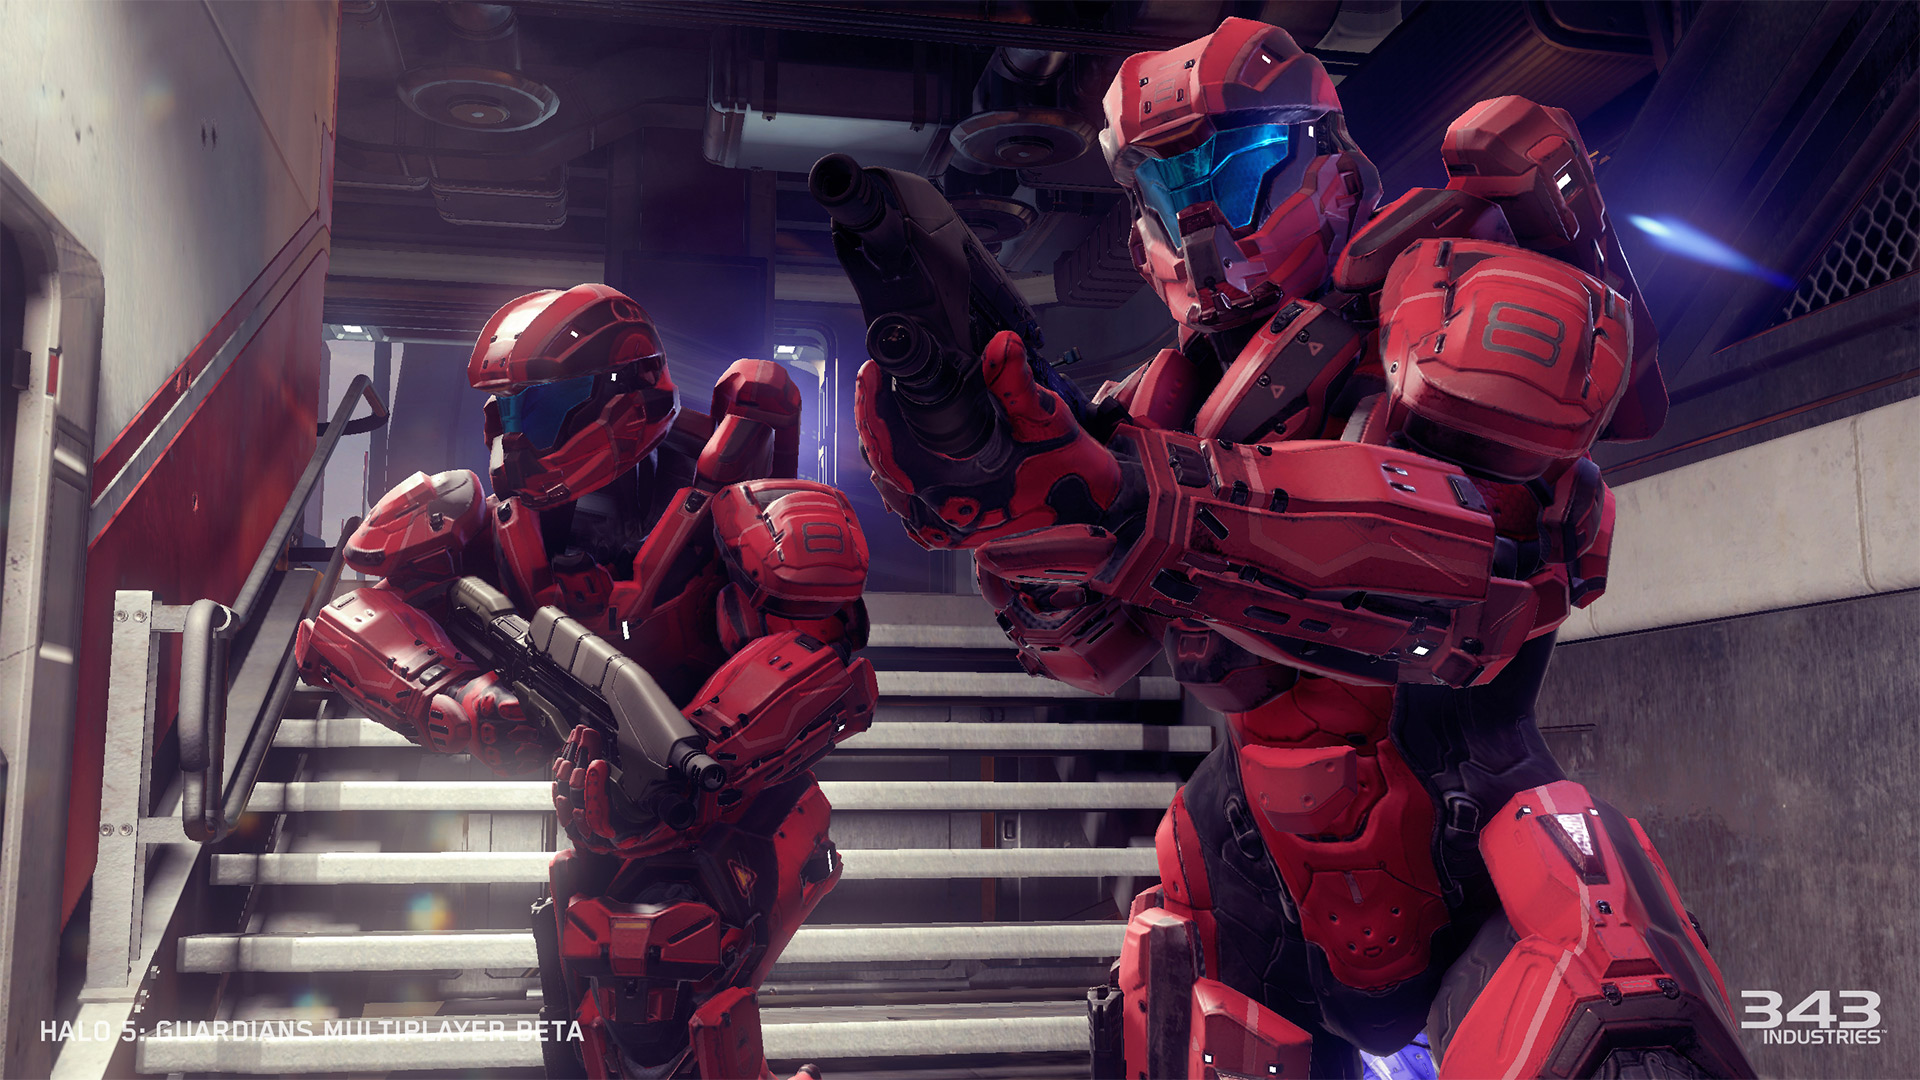 Media asset in full size related to 3dfxzone.it news item entitled as follows: Microsoft rilascia la demo di Halo 5: Guardians in multiplayer beta | Image Name: news22040_Halo-5-Guardians-multiplayer-beta-screenshot_2.jpg